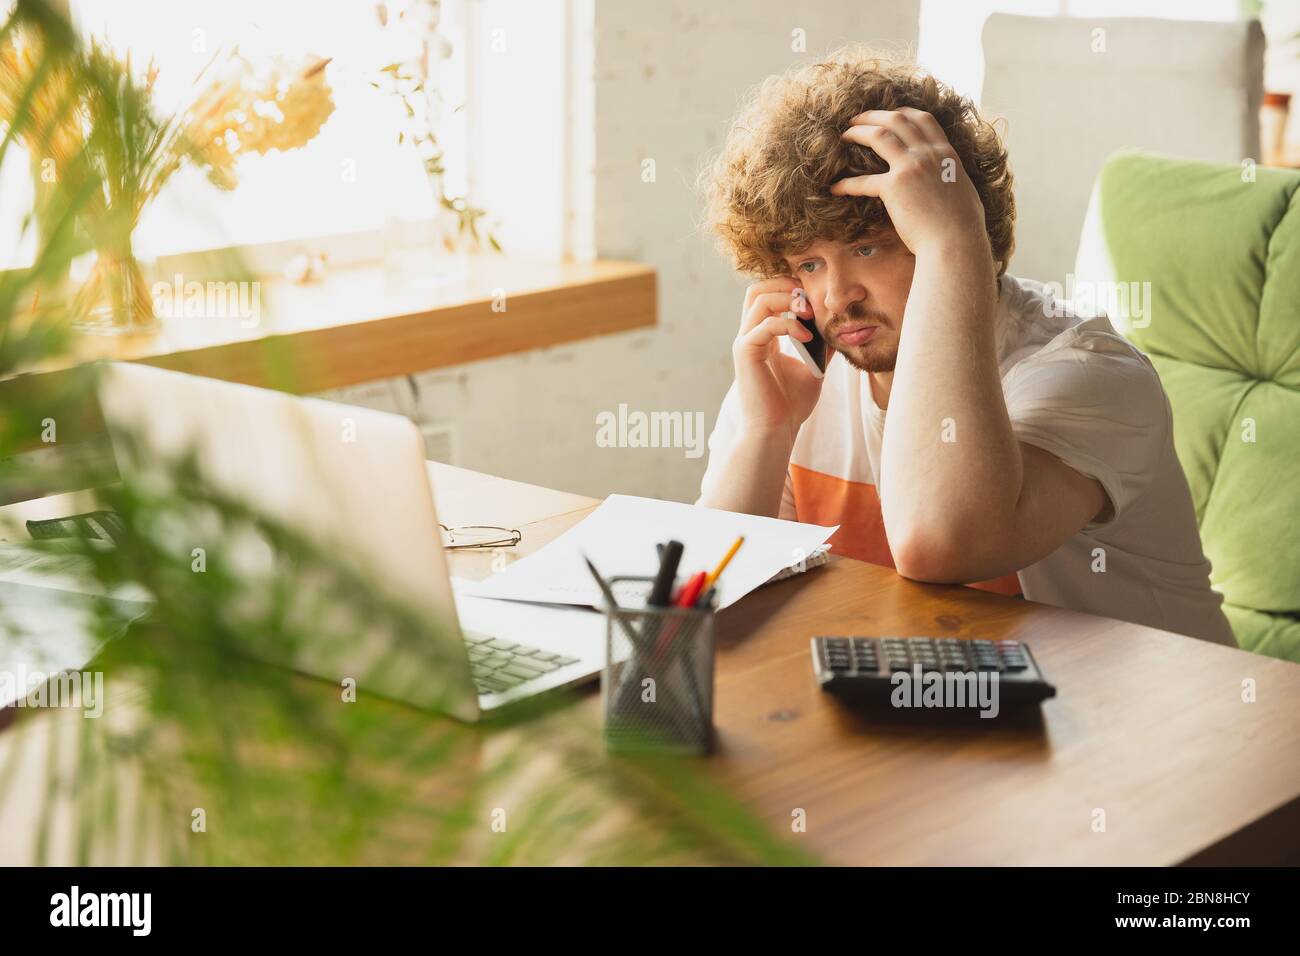 Caucasian upset and despair man watching financial and economical reports with income reduction during coronavirus quarantine, problems. Worldwide crisis. Lack of money, business fall, empty wallet. Stock Photo